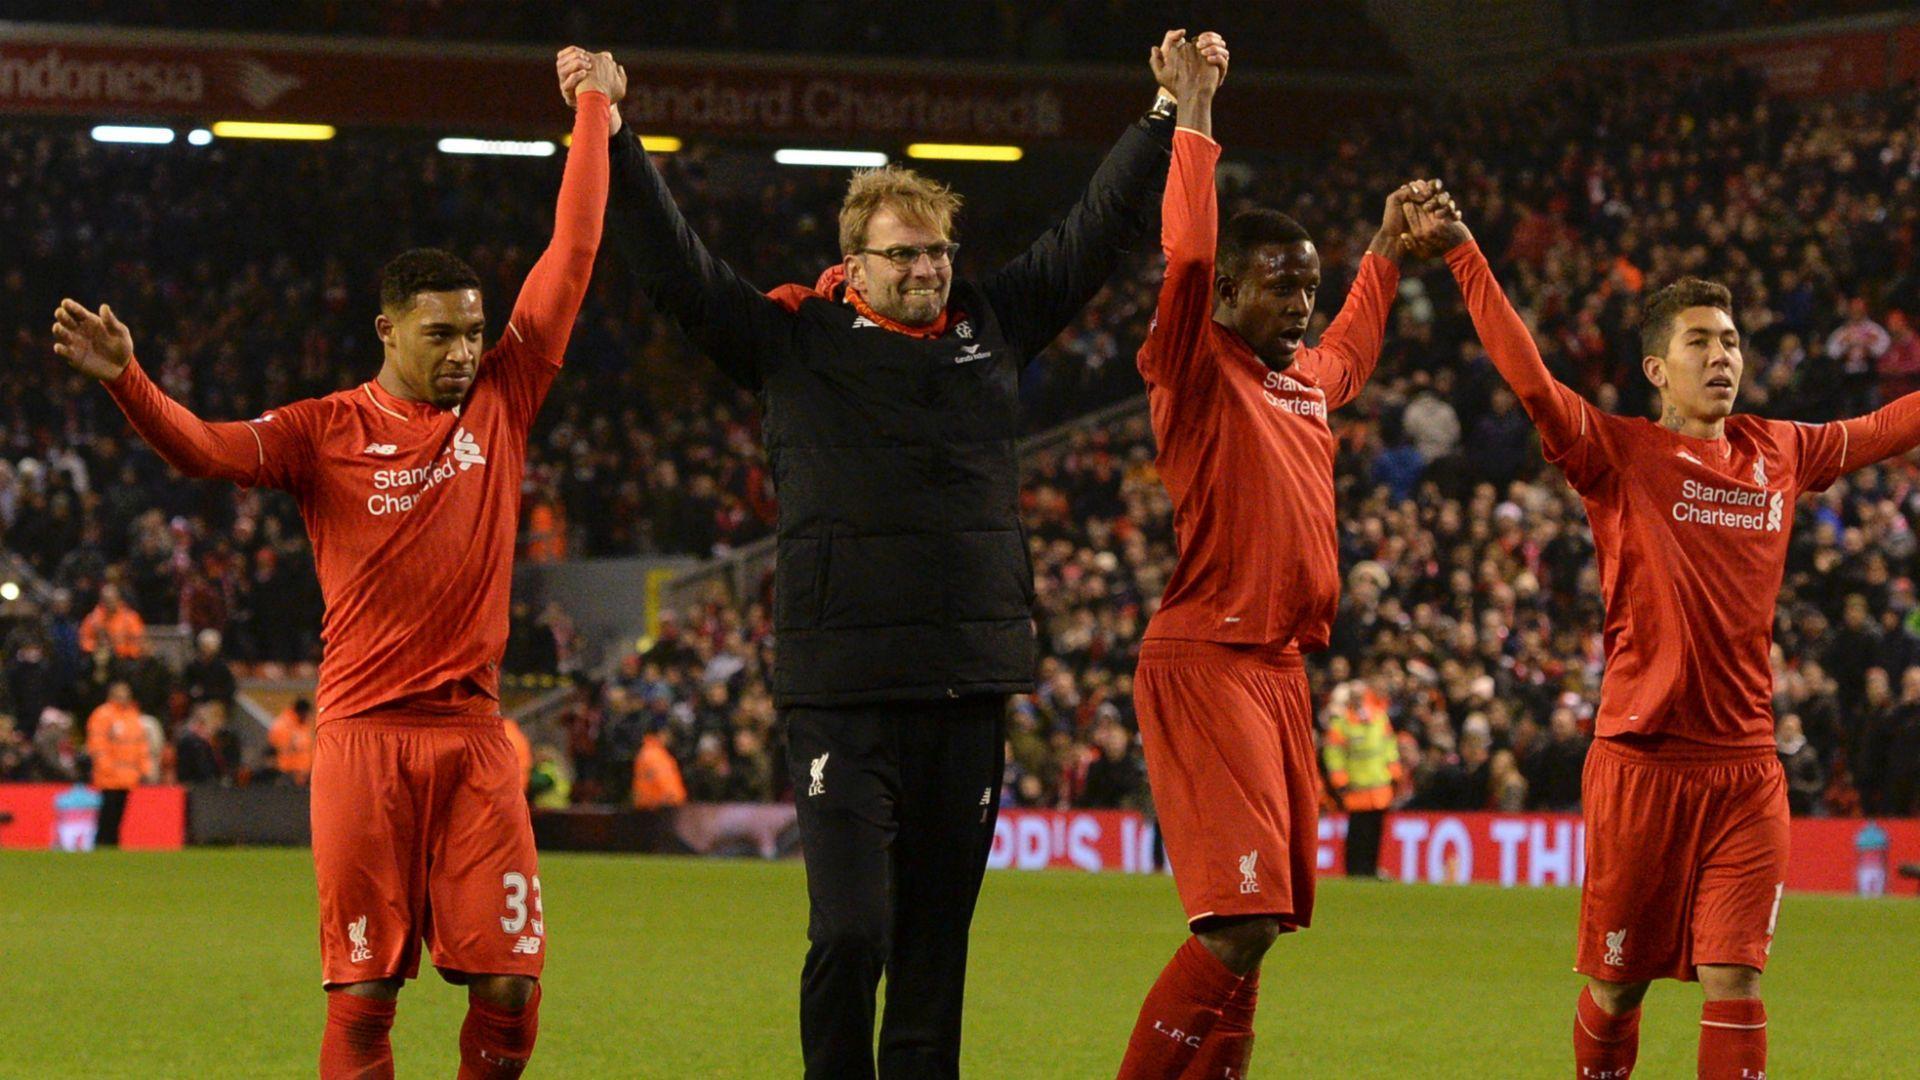 Late draw could be 'very special moment' for Liverpool